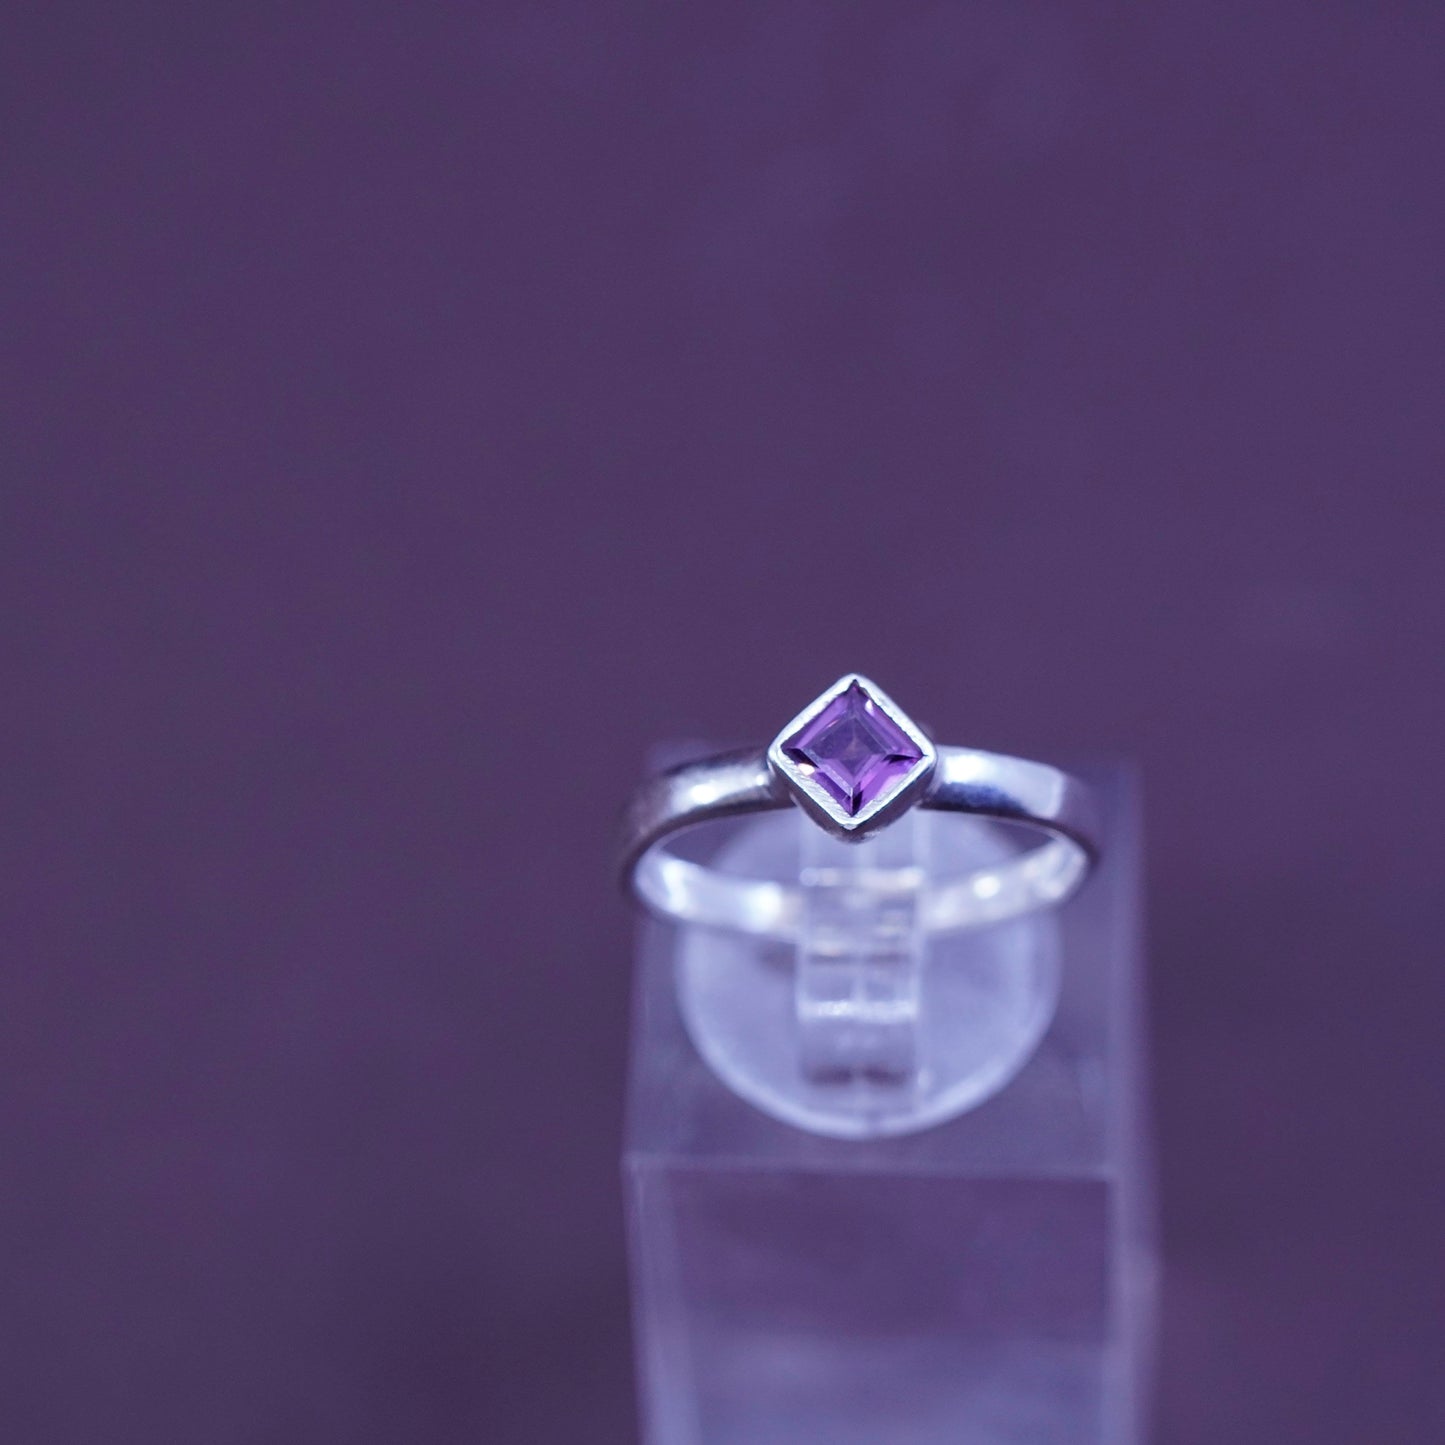 Size 7, Sterling 925 silver handmade stackable band ring with square amethyst